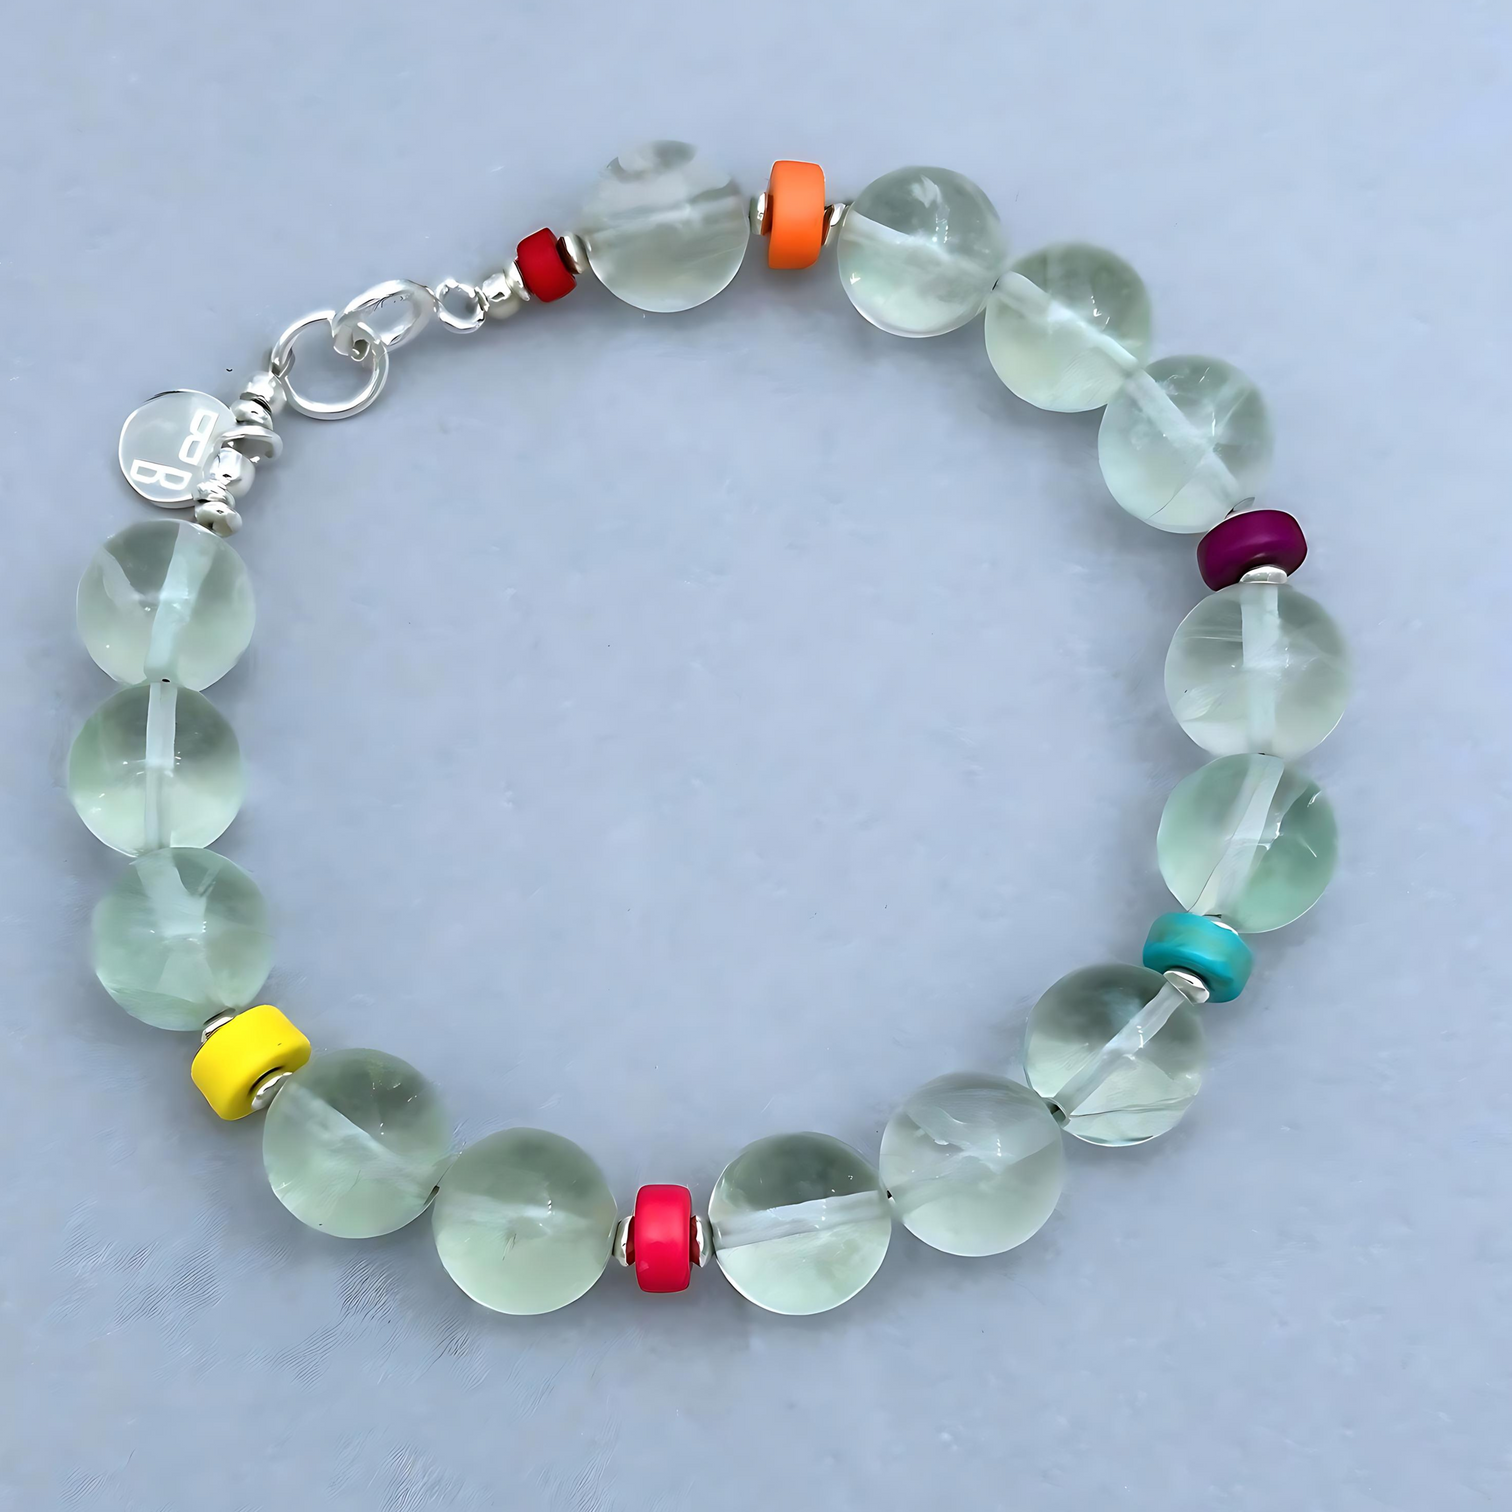 The JENIFER Bracelet is a fun and uplifting accessory. The beautiful pale blue Fluorite Beads combined with rainbow-hued Howlite Discs are everything else but boring. 